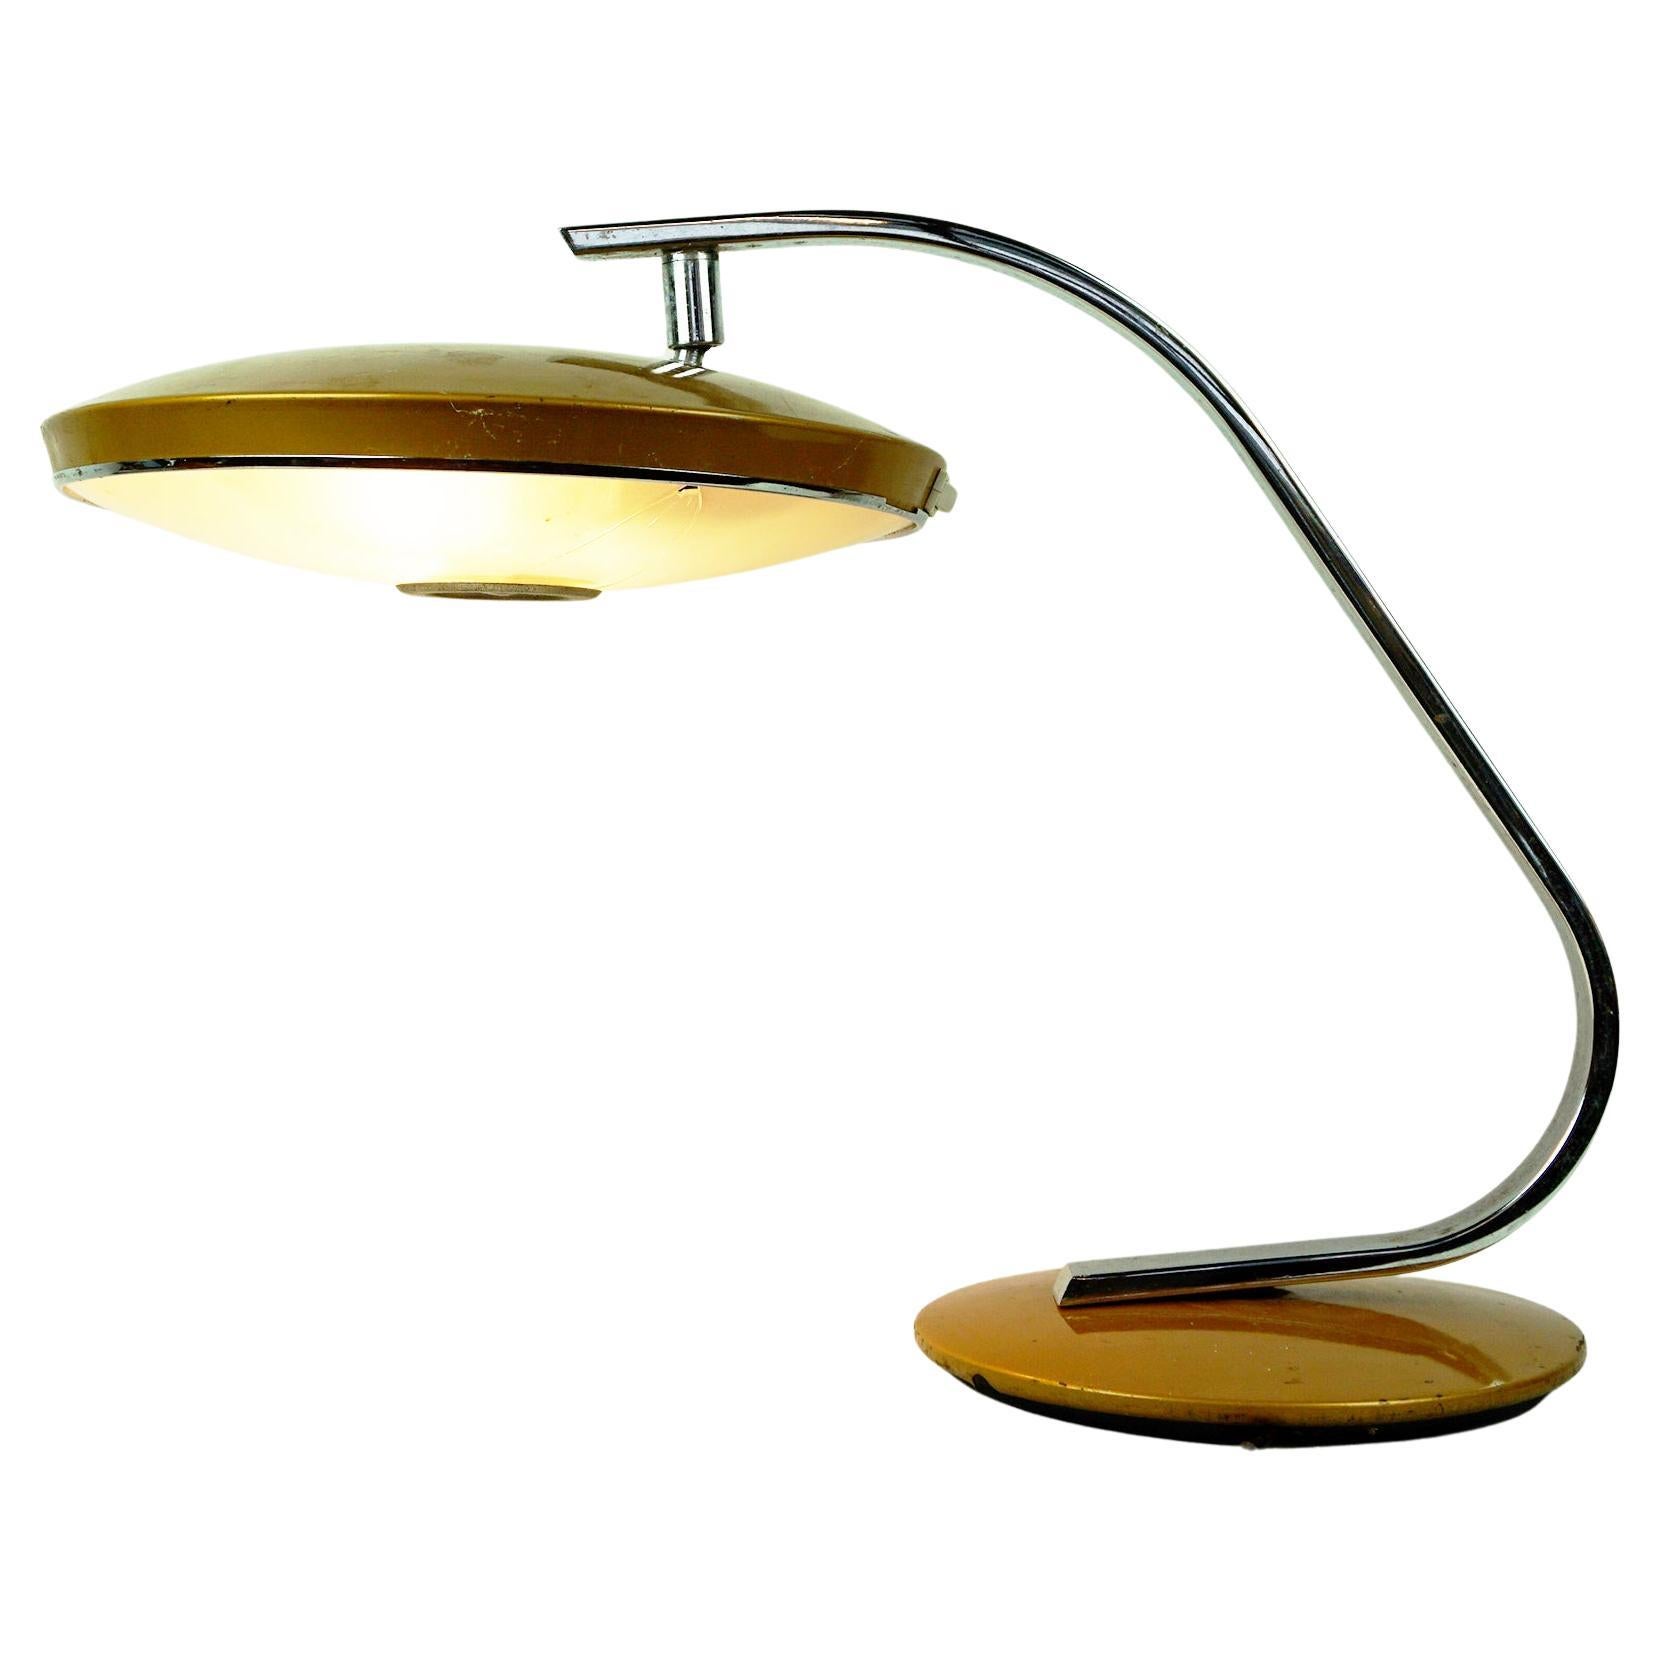 Gold Brown Metal and Chrome Midcentury Desk Lamp Mod. 520 by Fase Madrid Spain